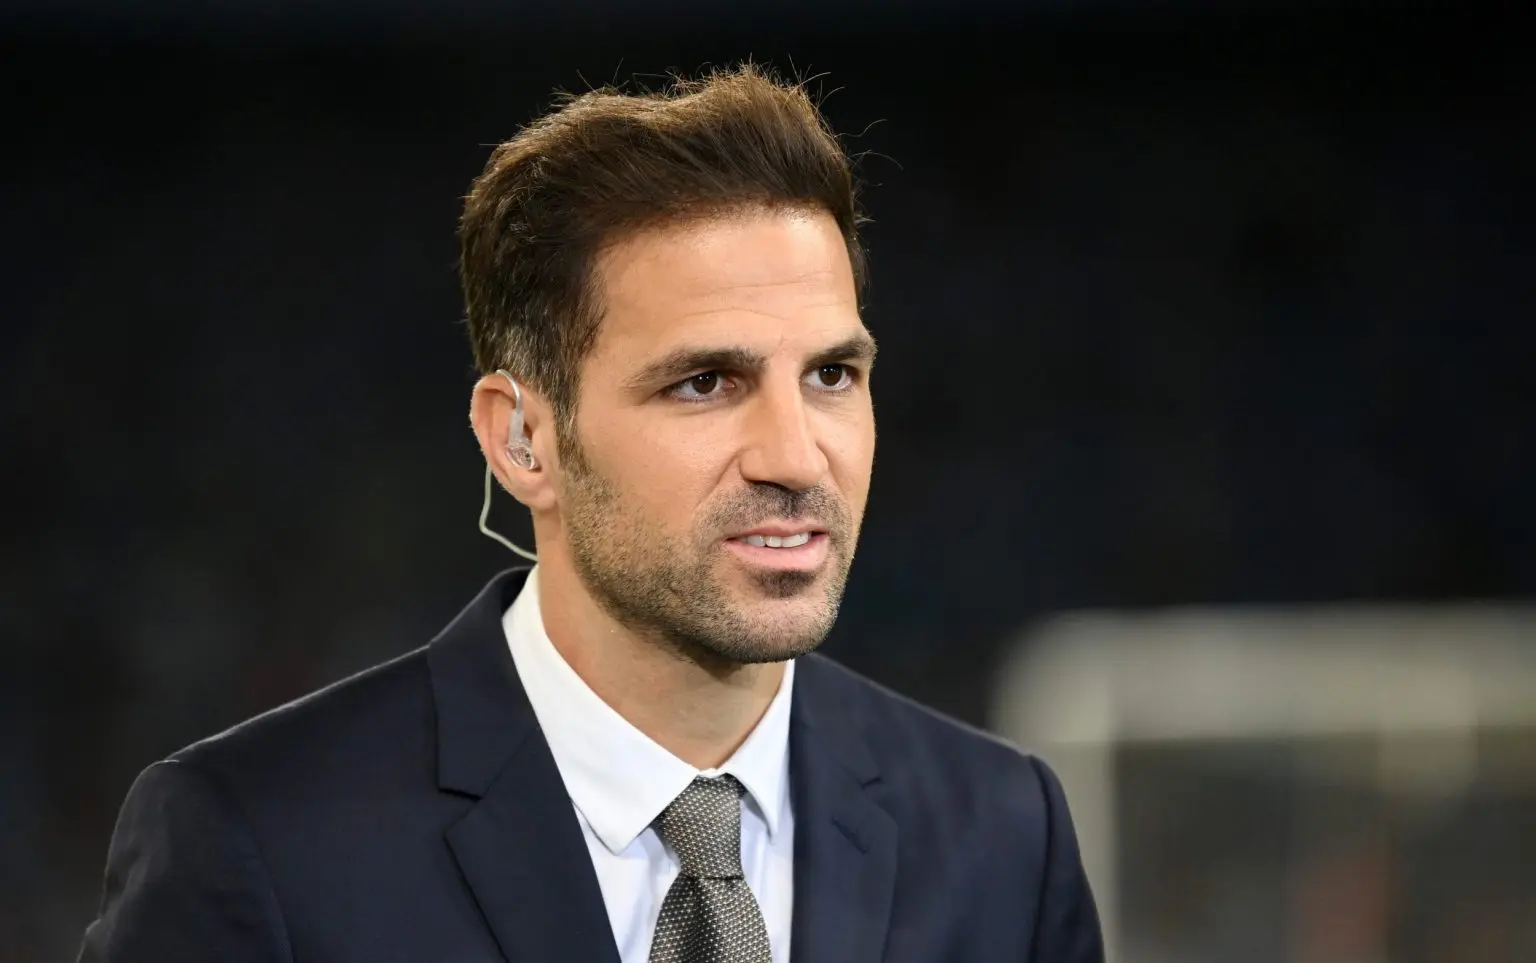 EPL: Top footballer, he’ll grow – Cesc Fabregas impressed with two Chelsea players